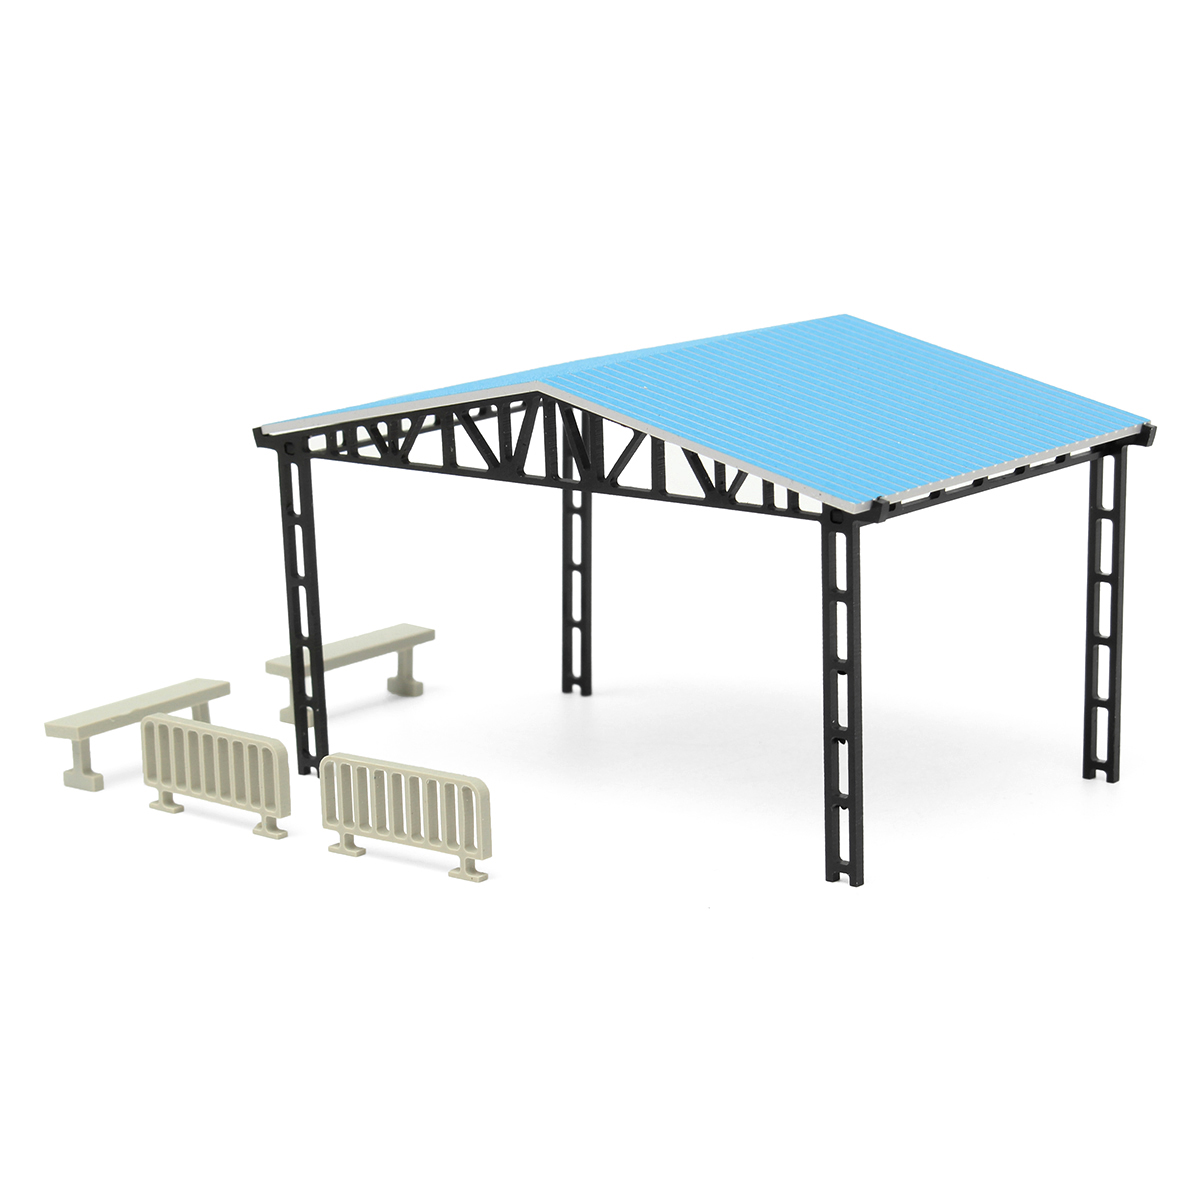 Model-Layout-Building-Parking-Shed-With-2-Fences-2-Benches-HO-Scale-187-Kit-1093333-3